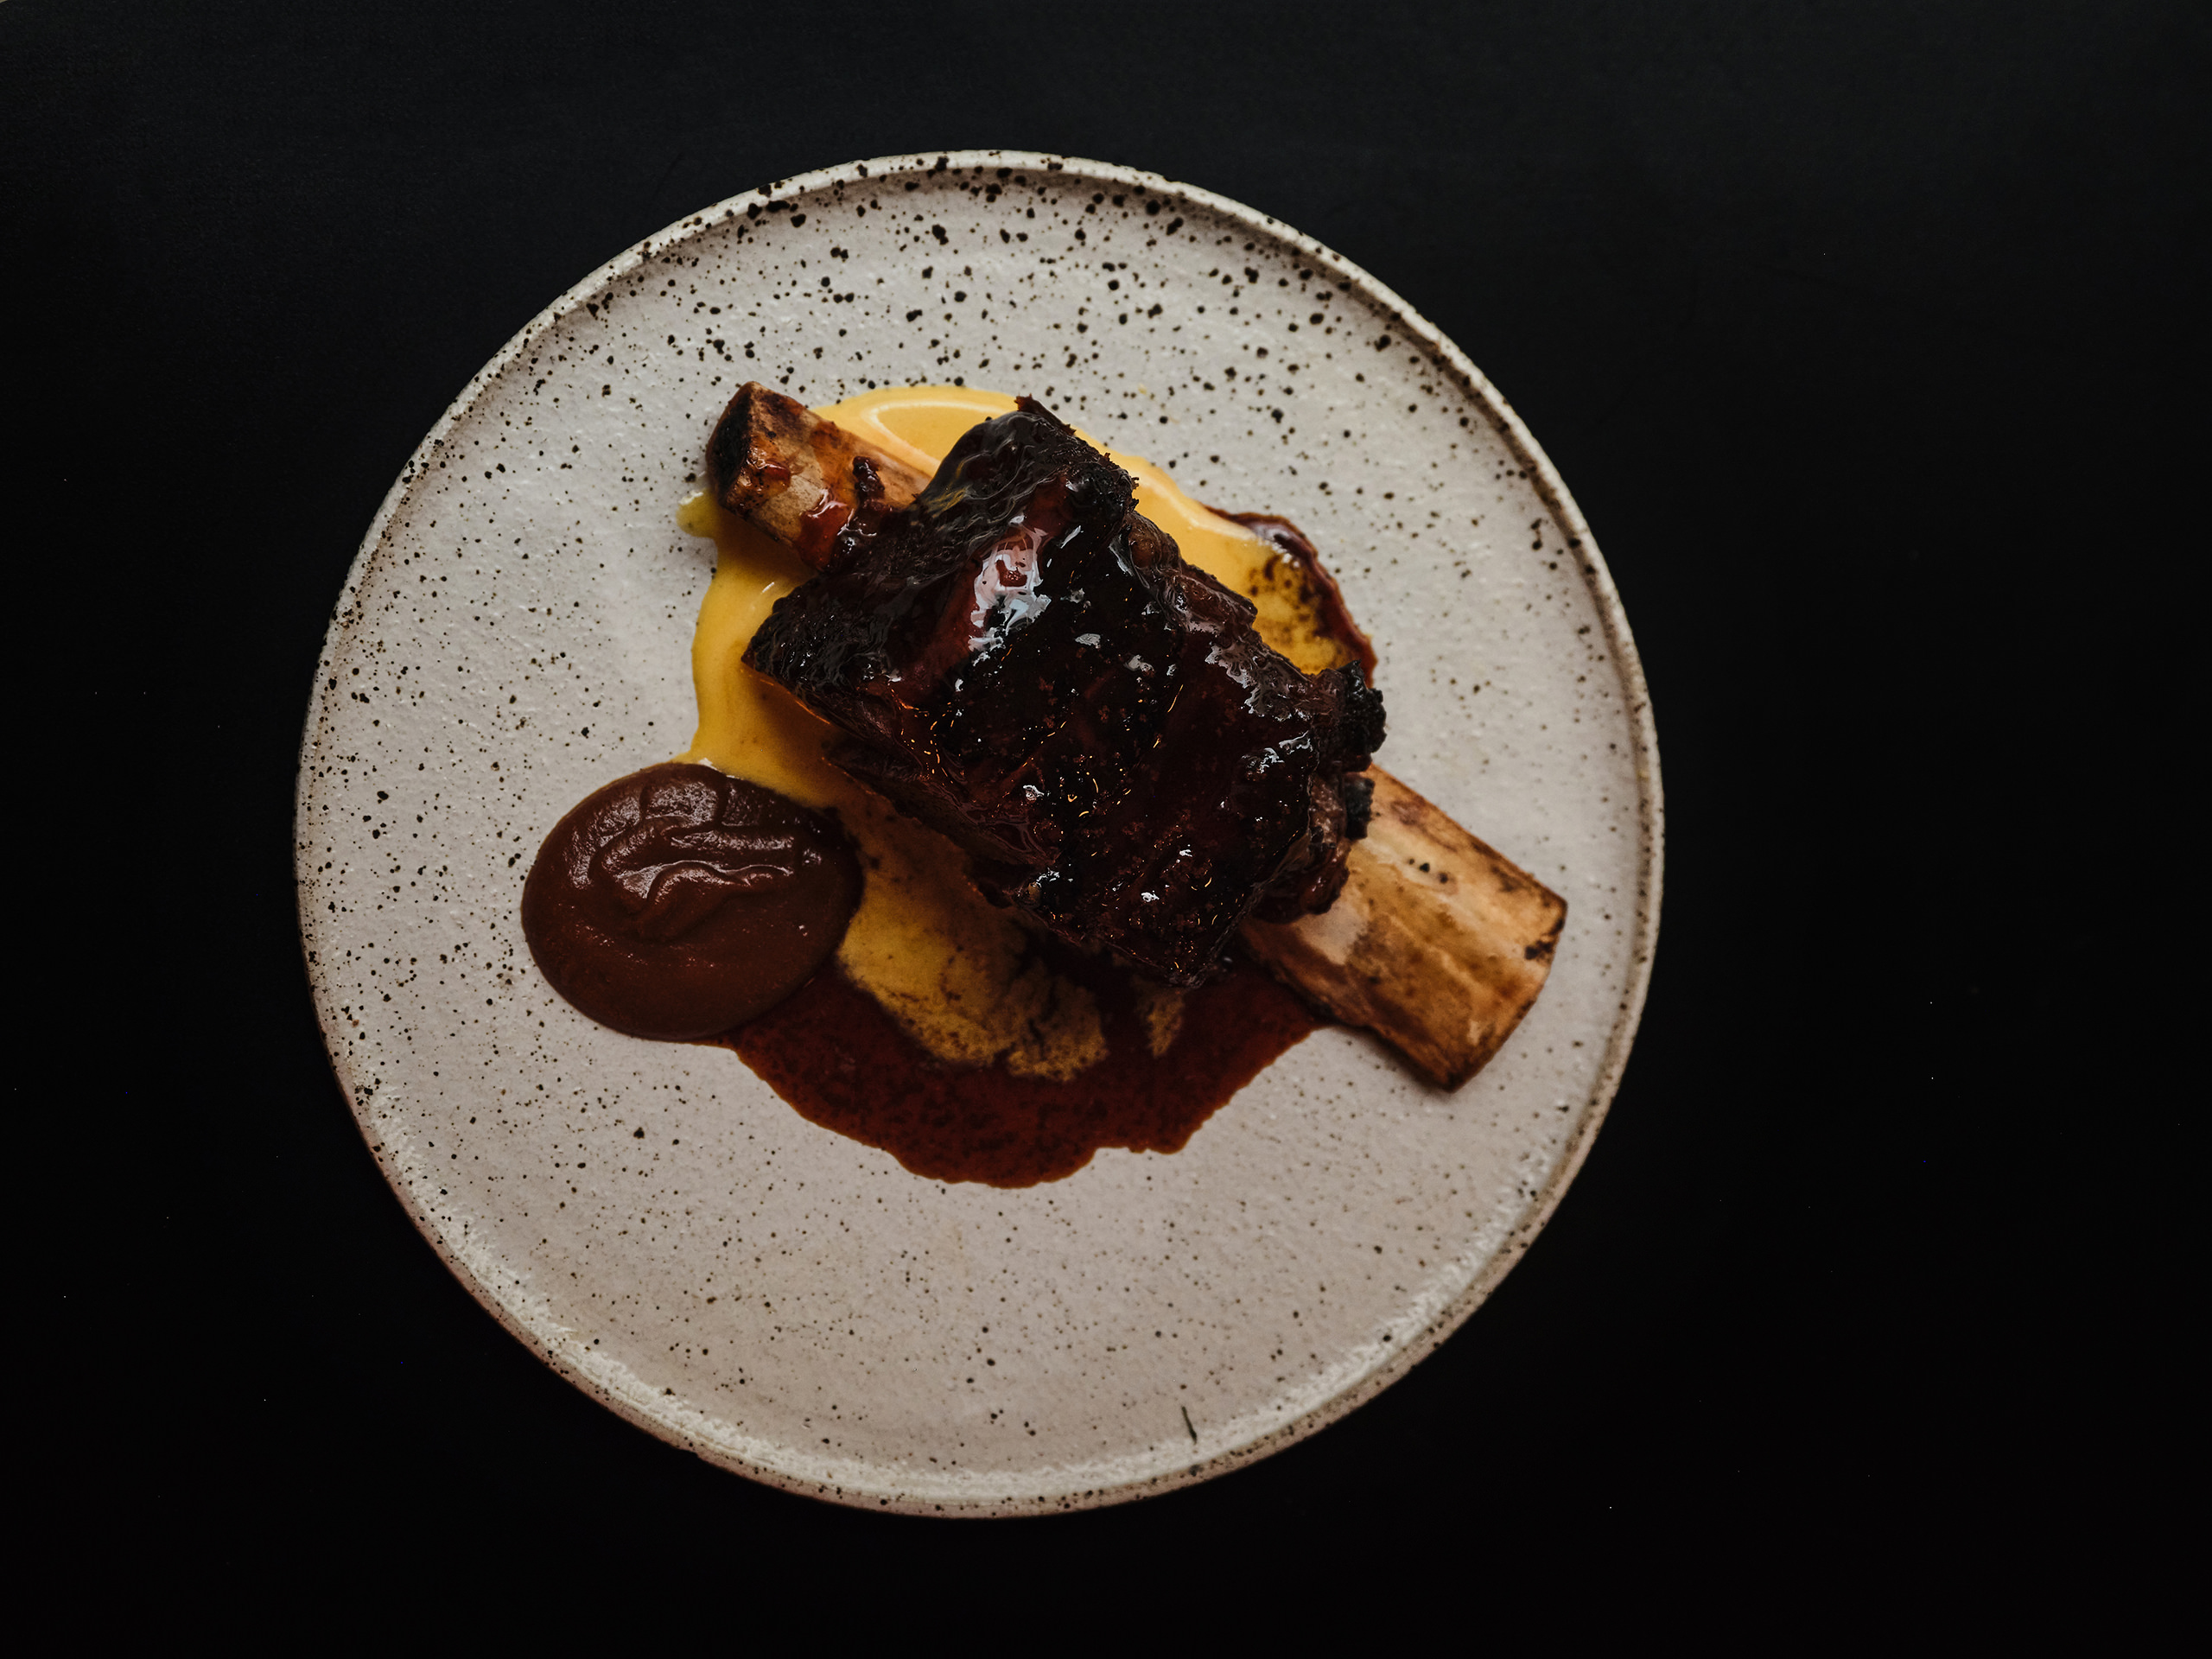 Wagyu short rib ‘Bistek’ with burnt onion jam and salted duck emulsion